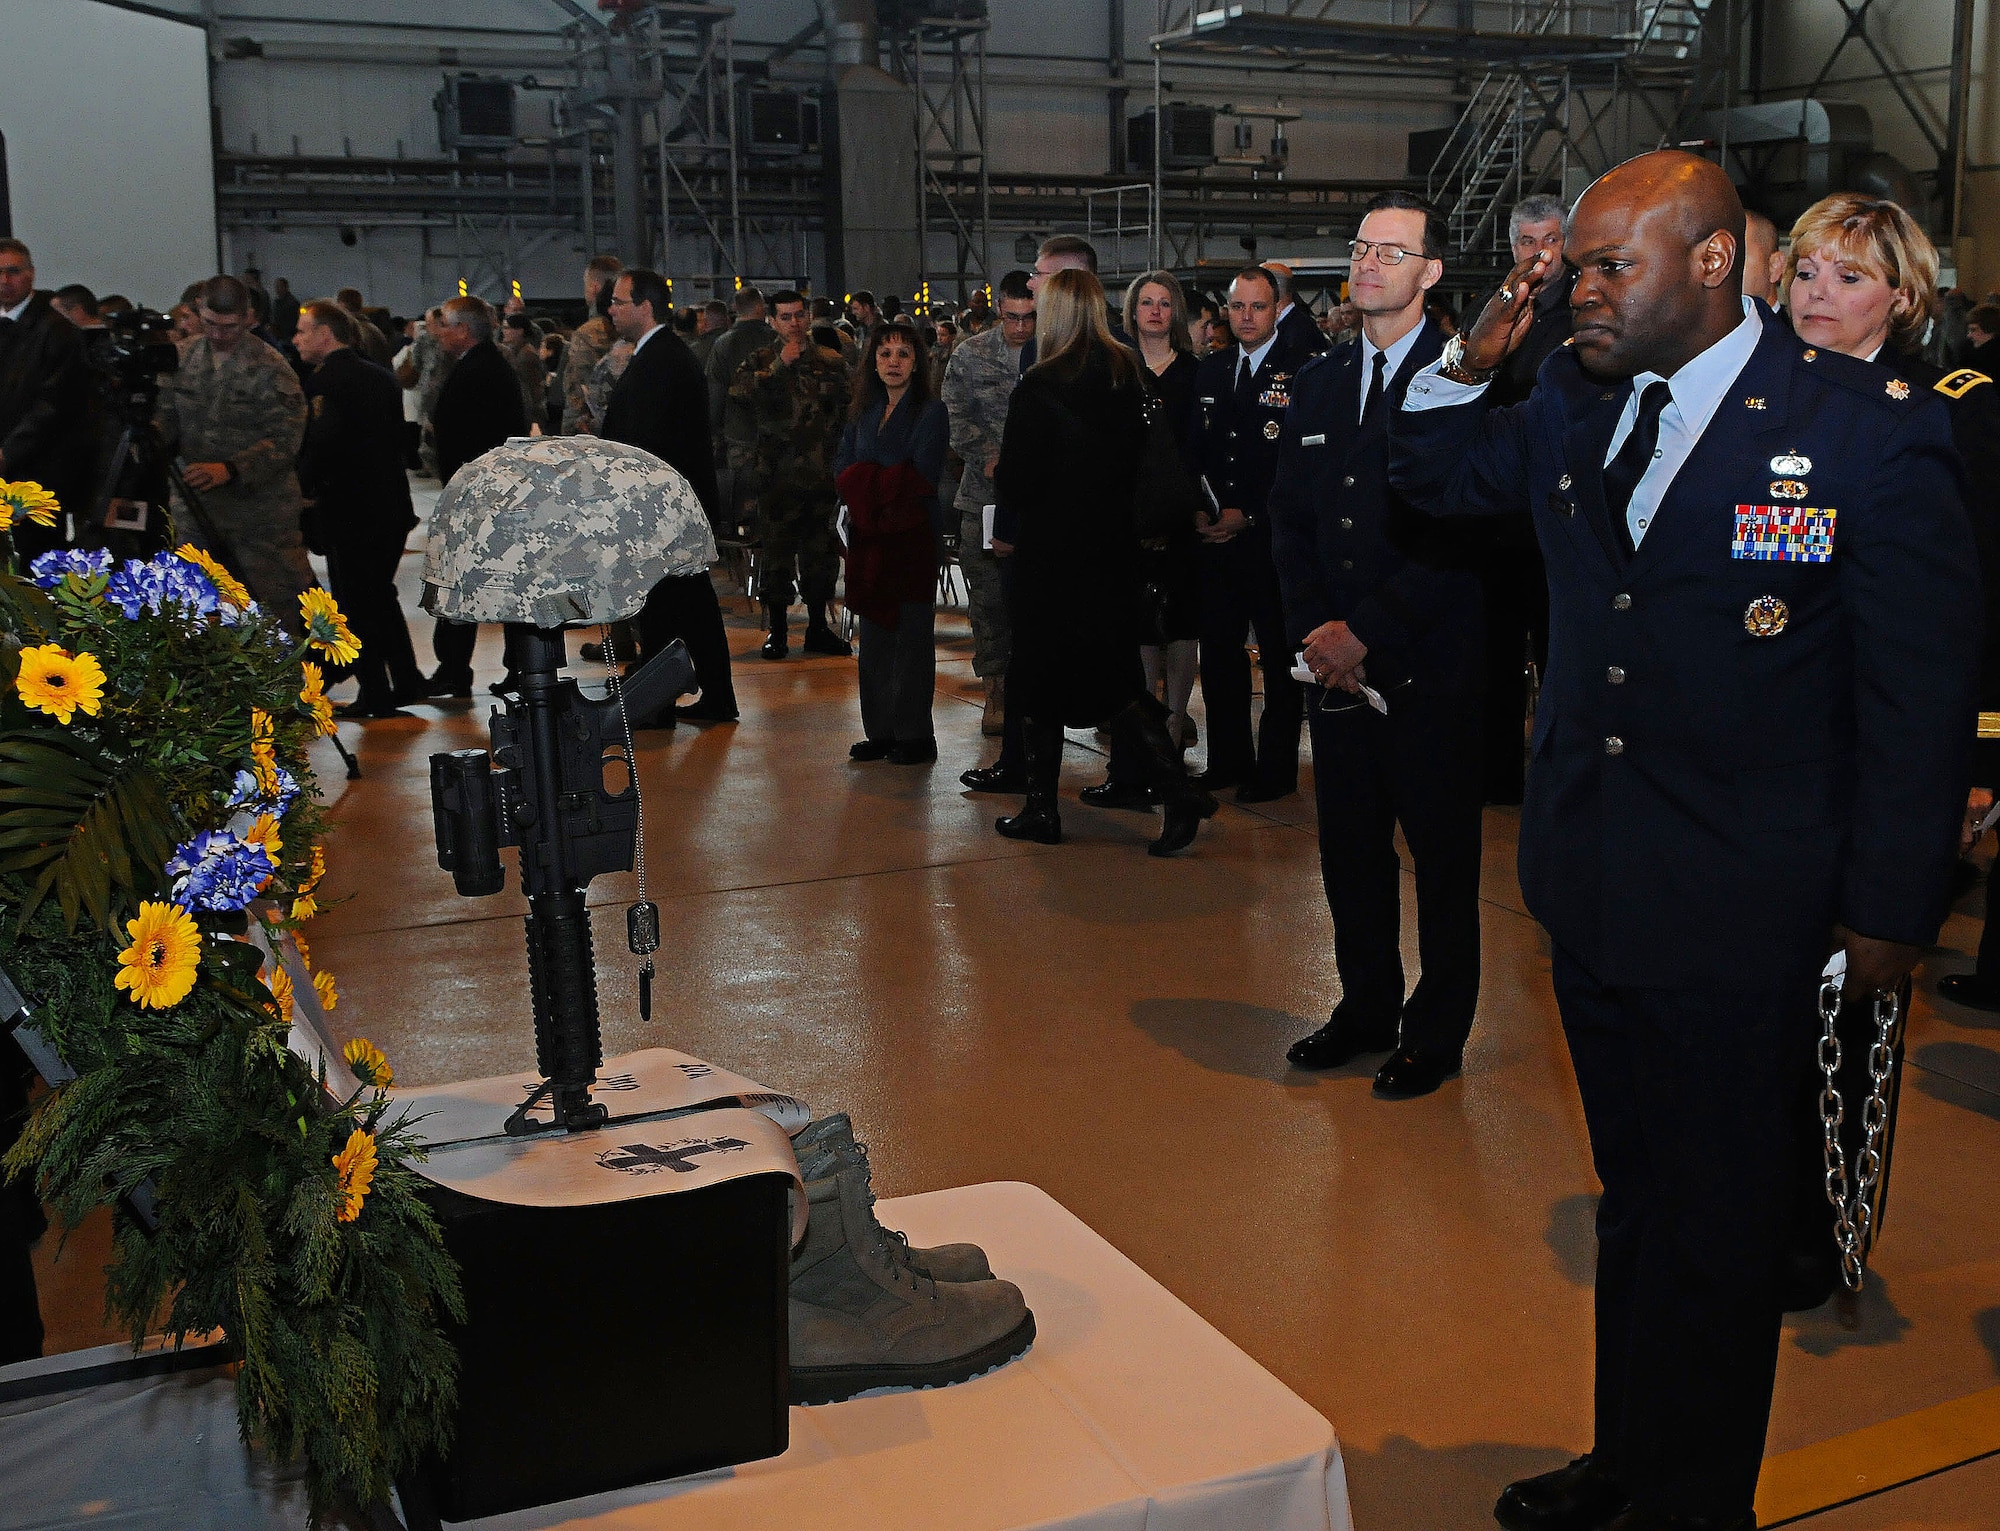 U.S. Air Force Lt. Col. Uduak Udoaka, 86th Vehicle Readiness Squadron commander, pays his respects during the memorial service for Airman 1st Class Zachary Cuddeback, 86th Vehicle Readiness Squadron, Ramstein Air Base, Germany, March 9, 2011. A1C Cuddeback was killed in action at Frankfurt International Airport March 2, 2011.   (U.S. Air Force photo by Airman 1st Class Desiree Whitney Esposito)